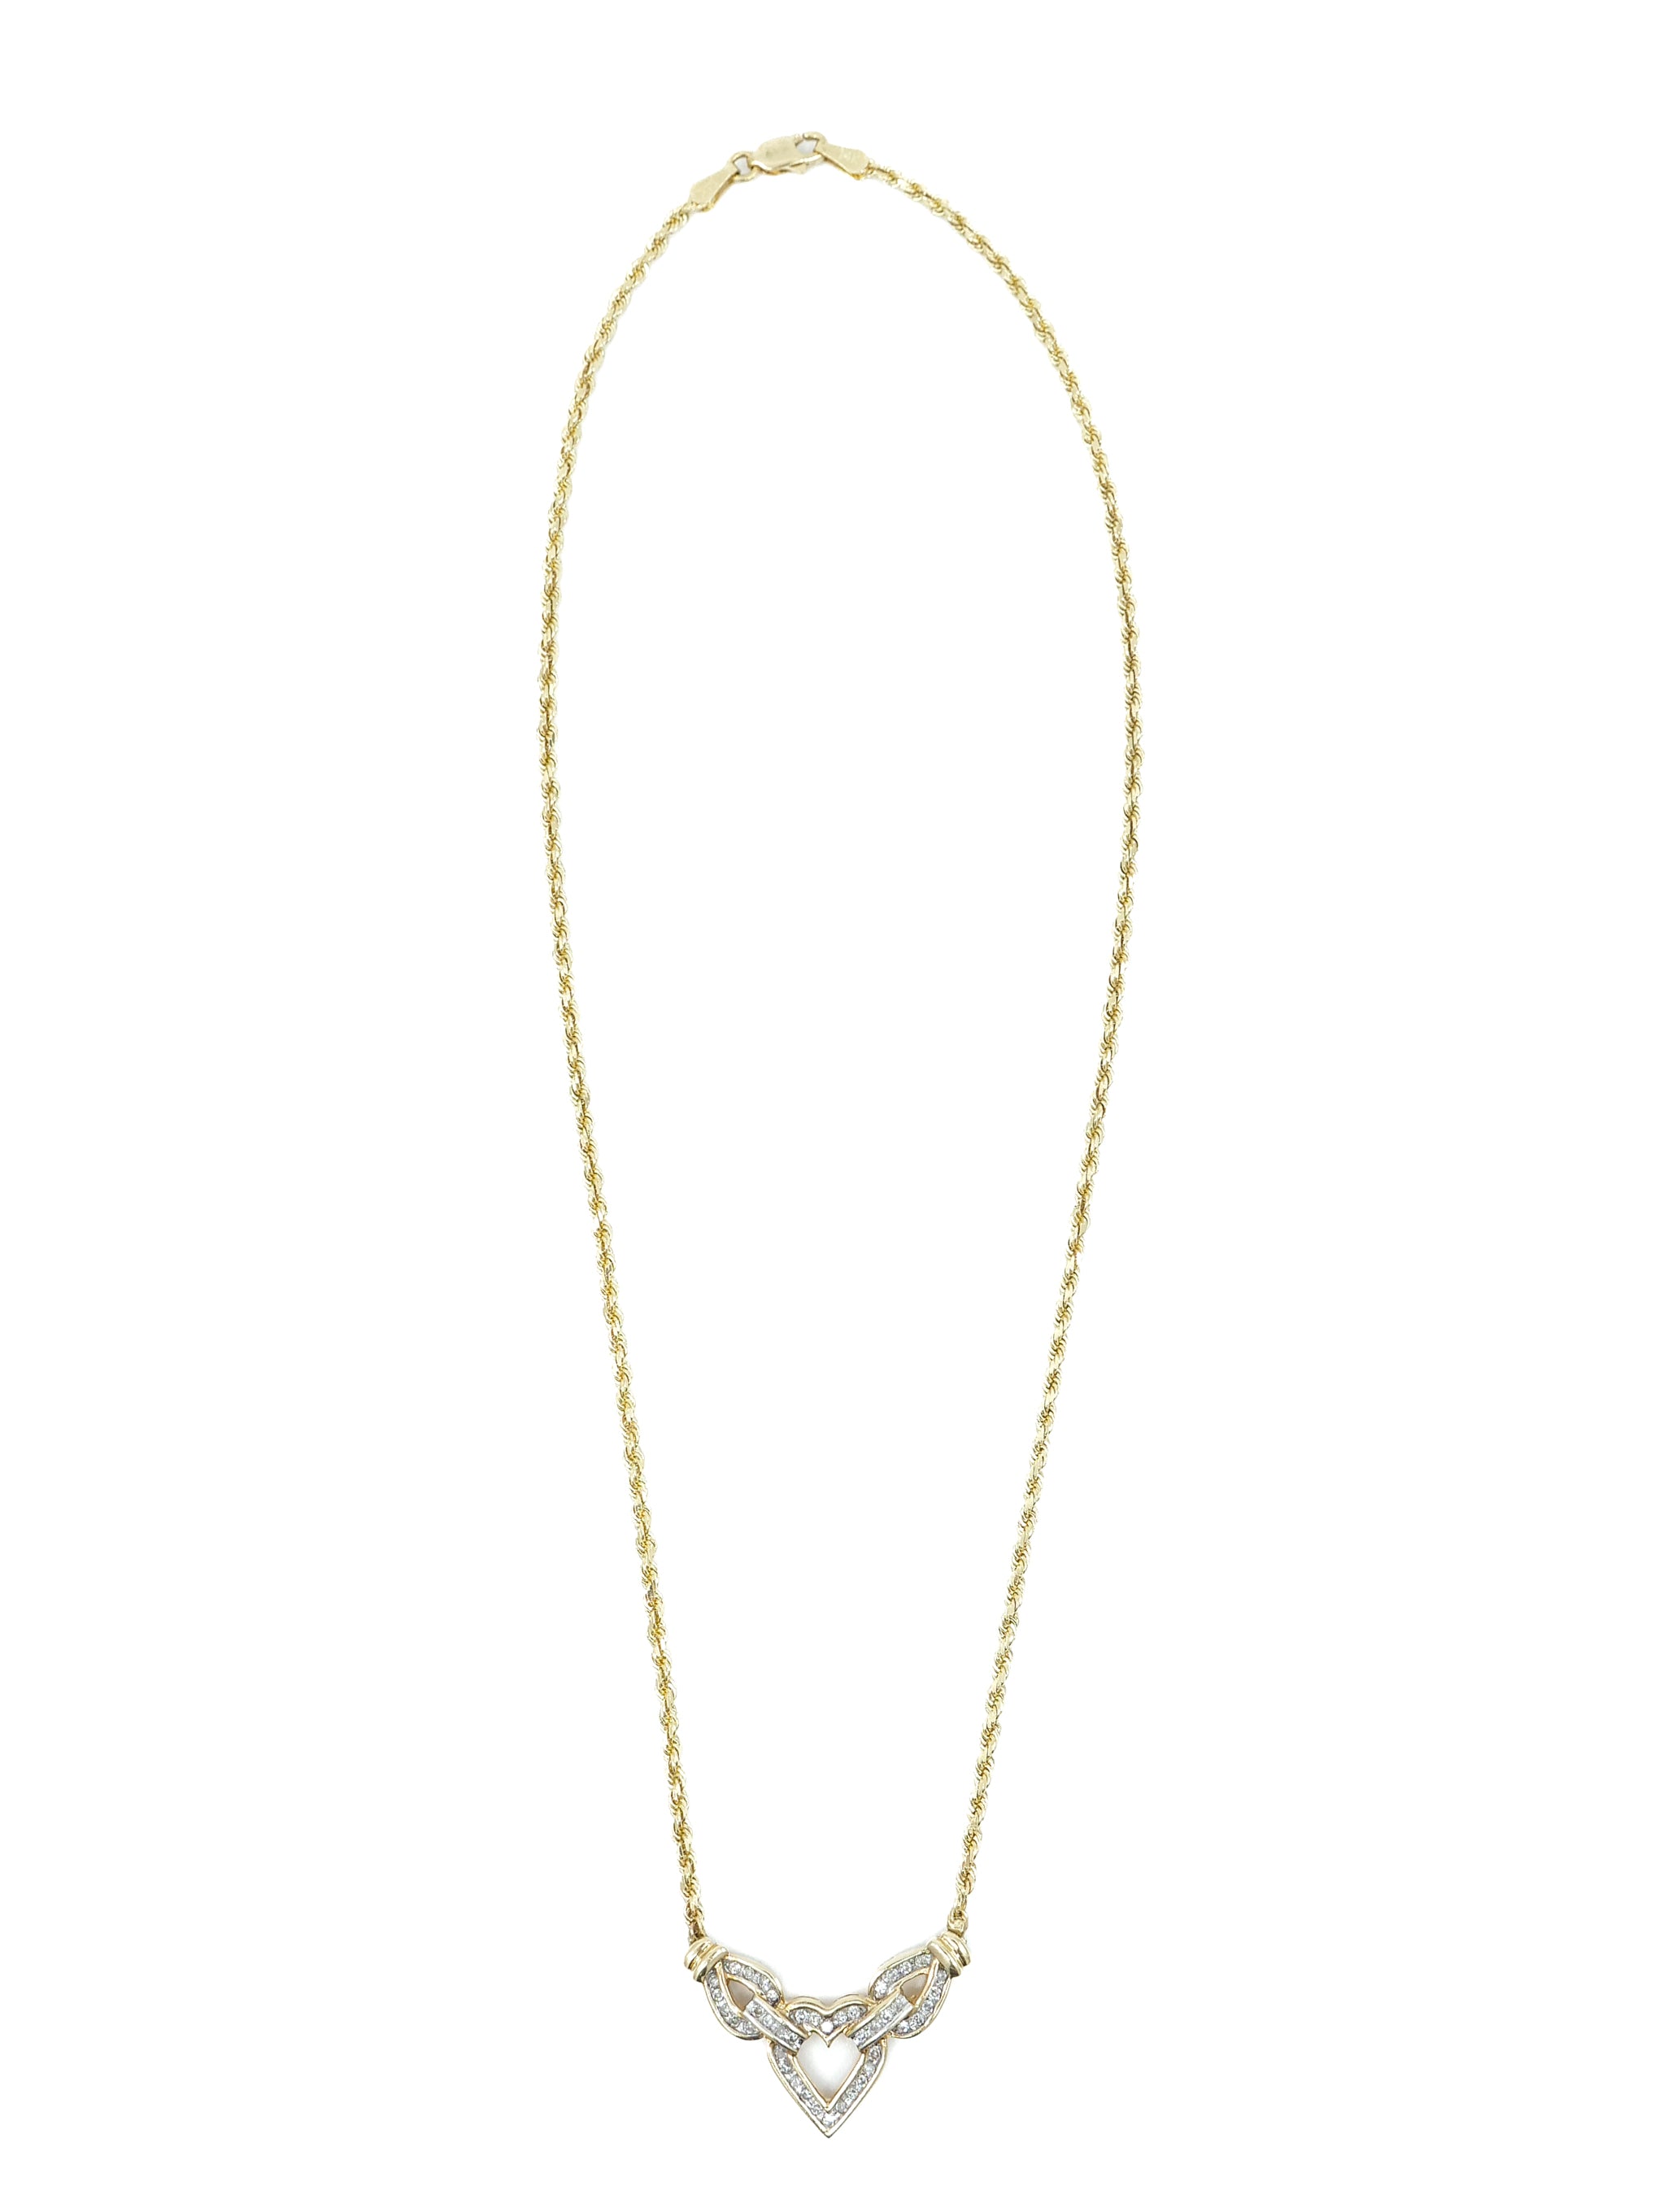 016 Gauge Diamond-Cut Rope Chain Necklace in 10K Solid Gold Bonded Sterling  Silver - 18